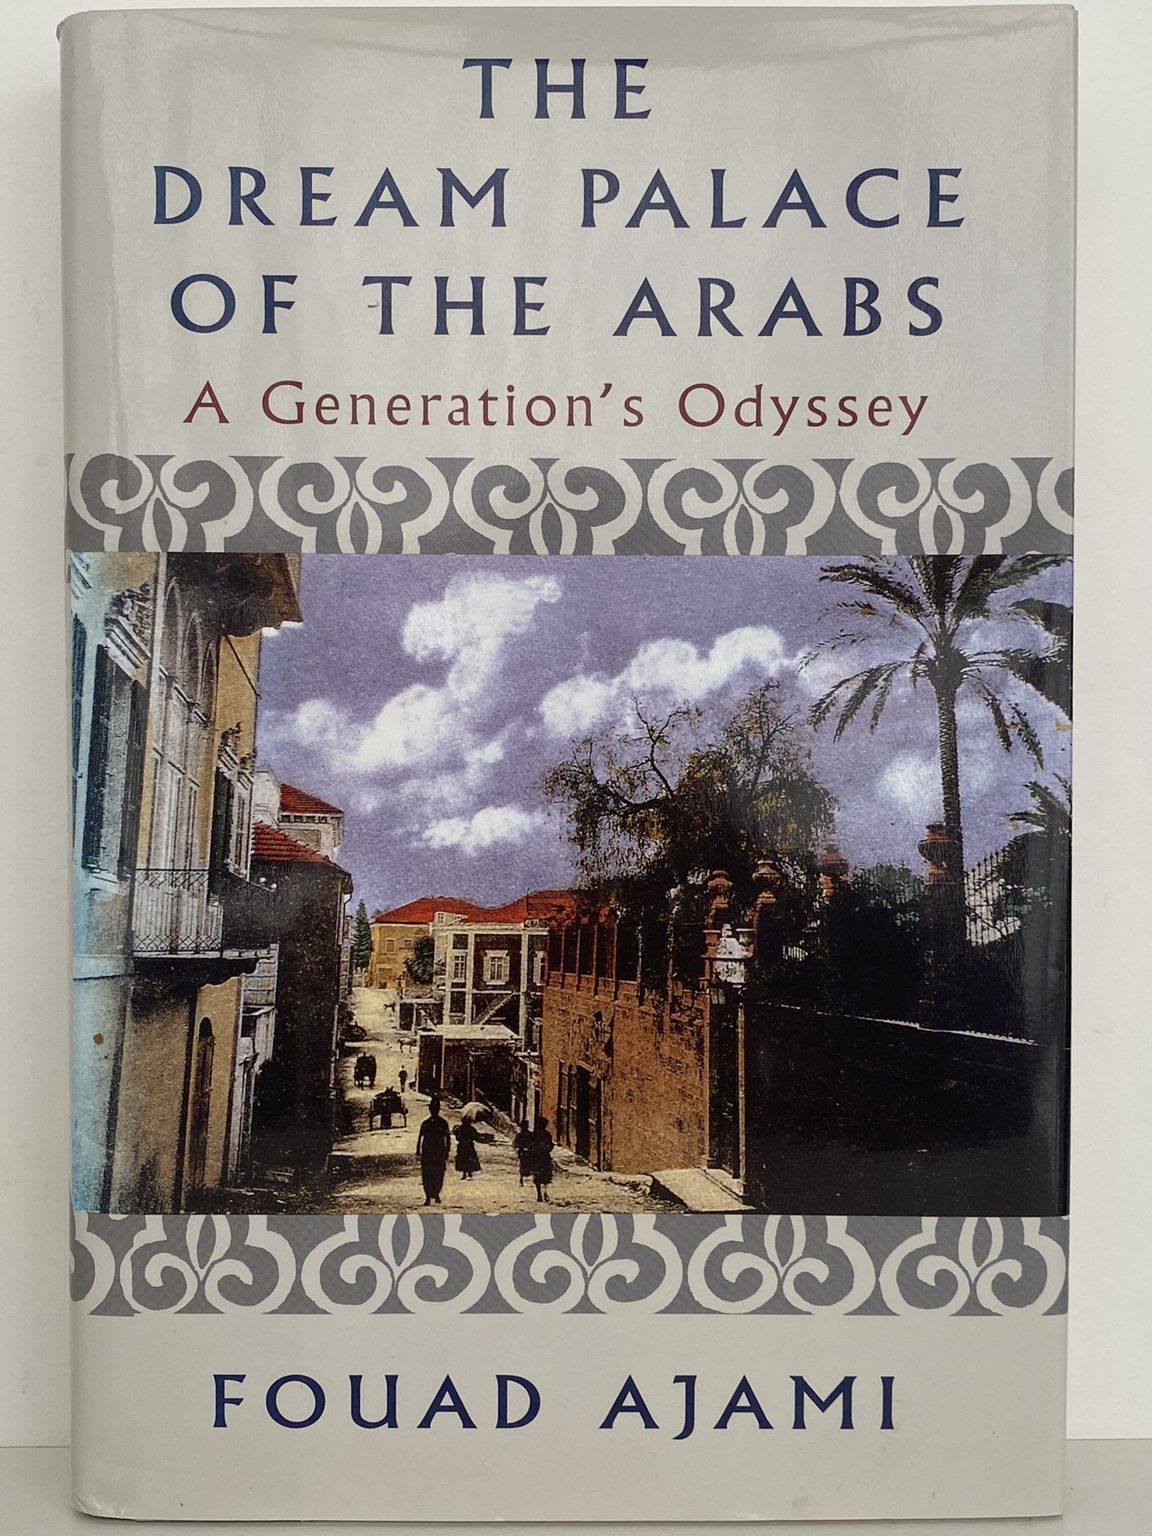 THE DREAM PALACE OF THE ARABS: A Generation's Odyssey